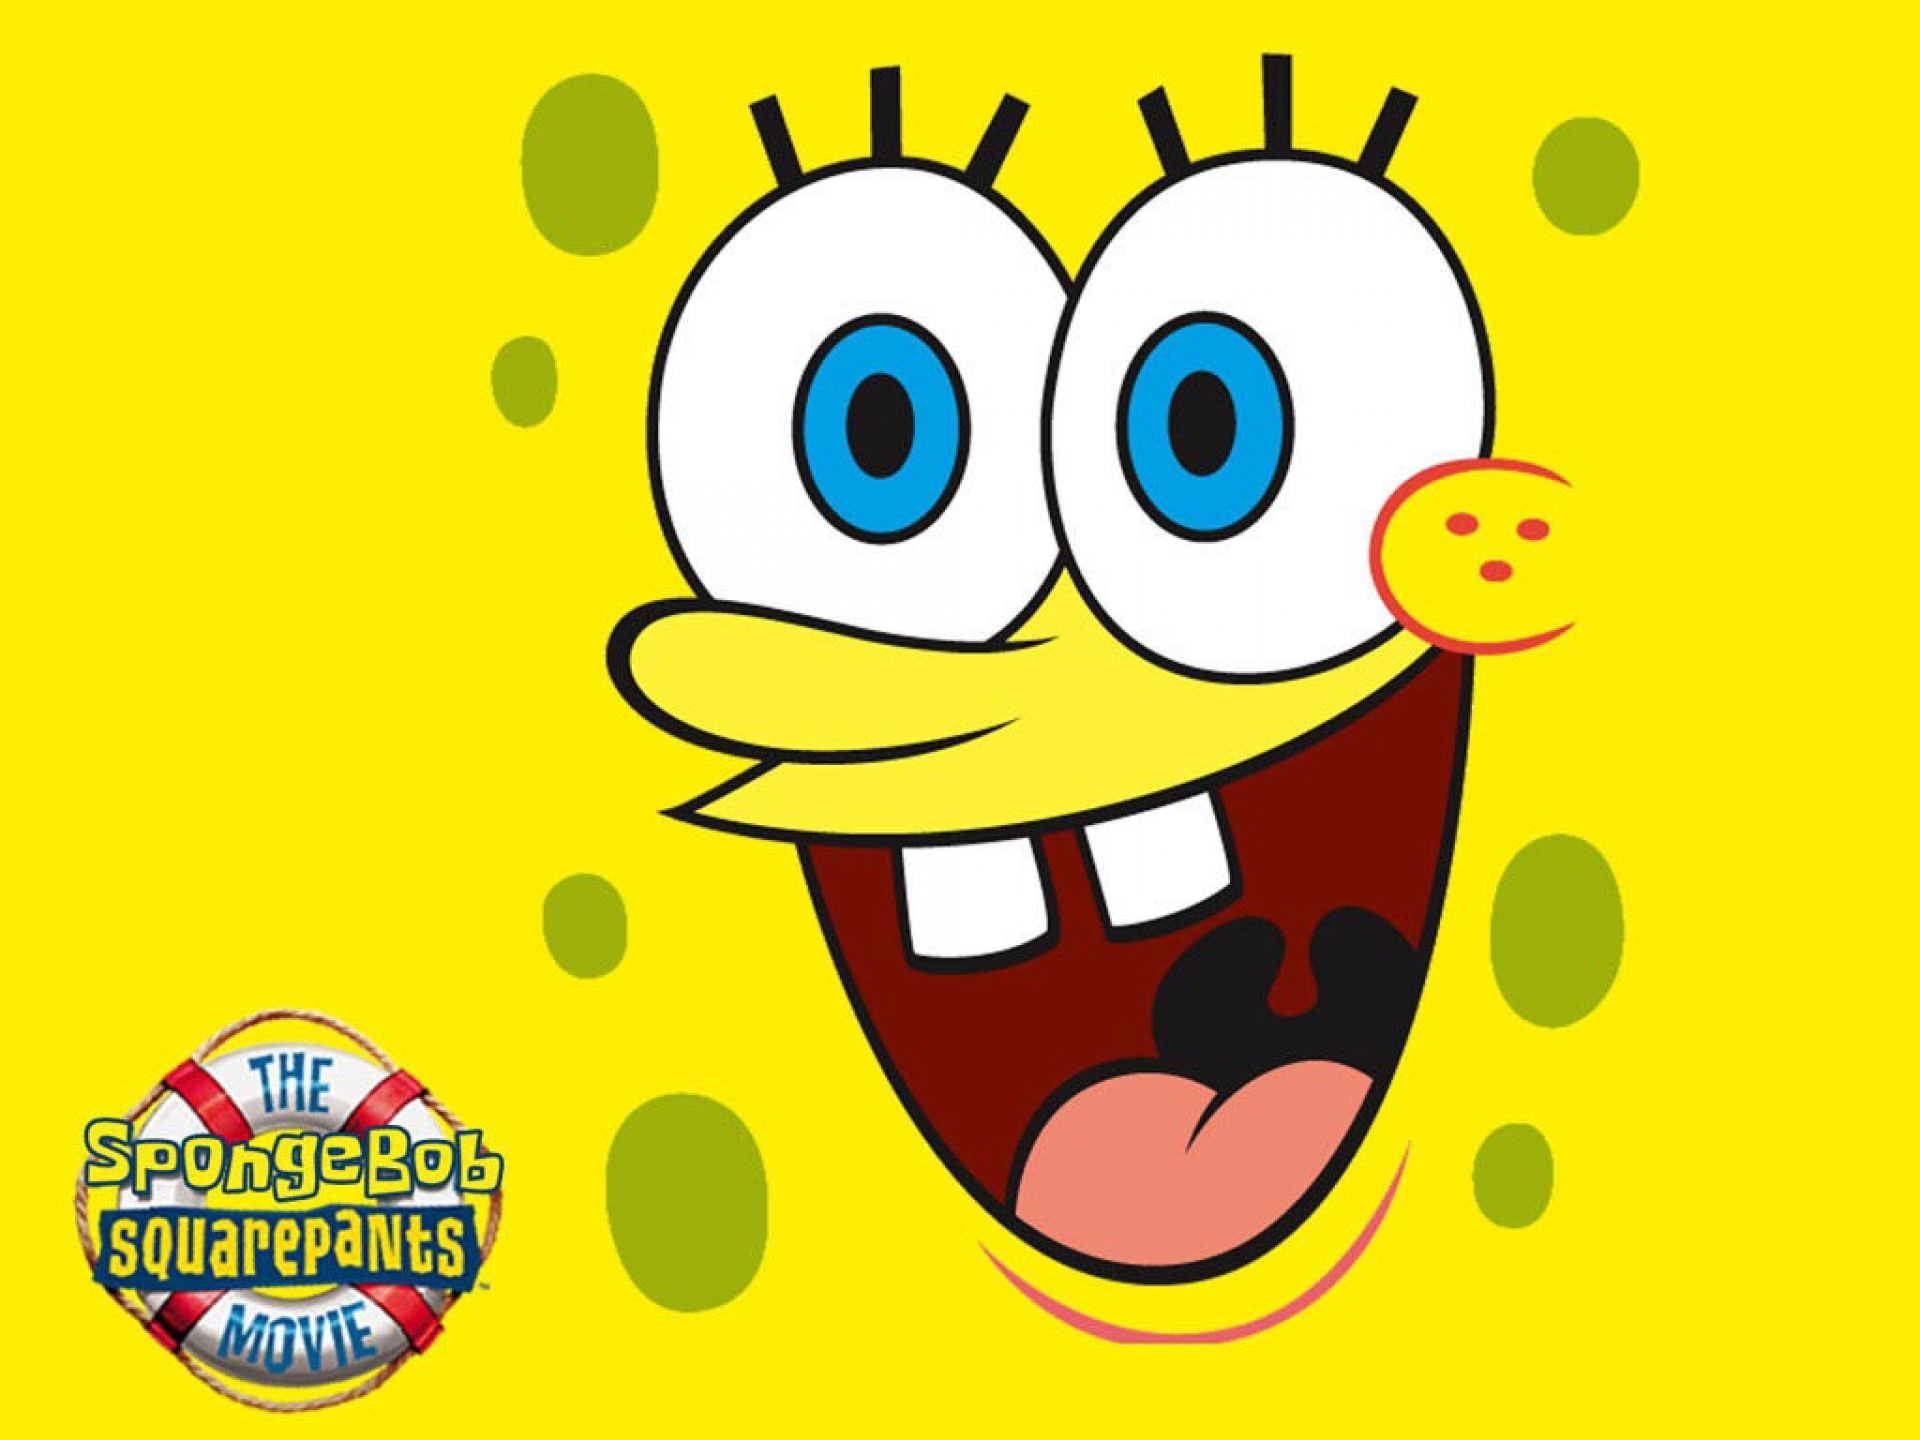 images of funny cartoon faces